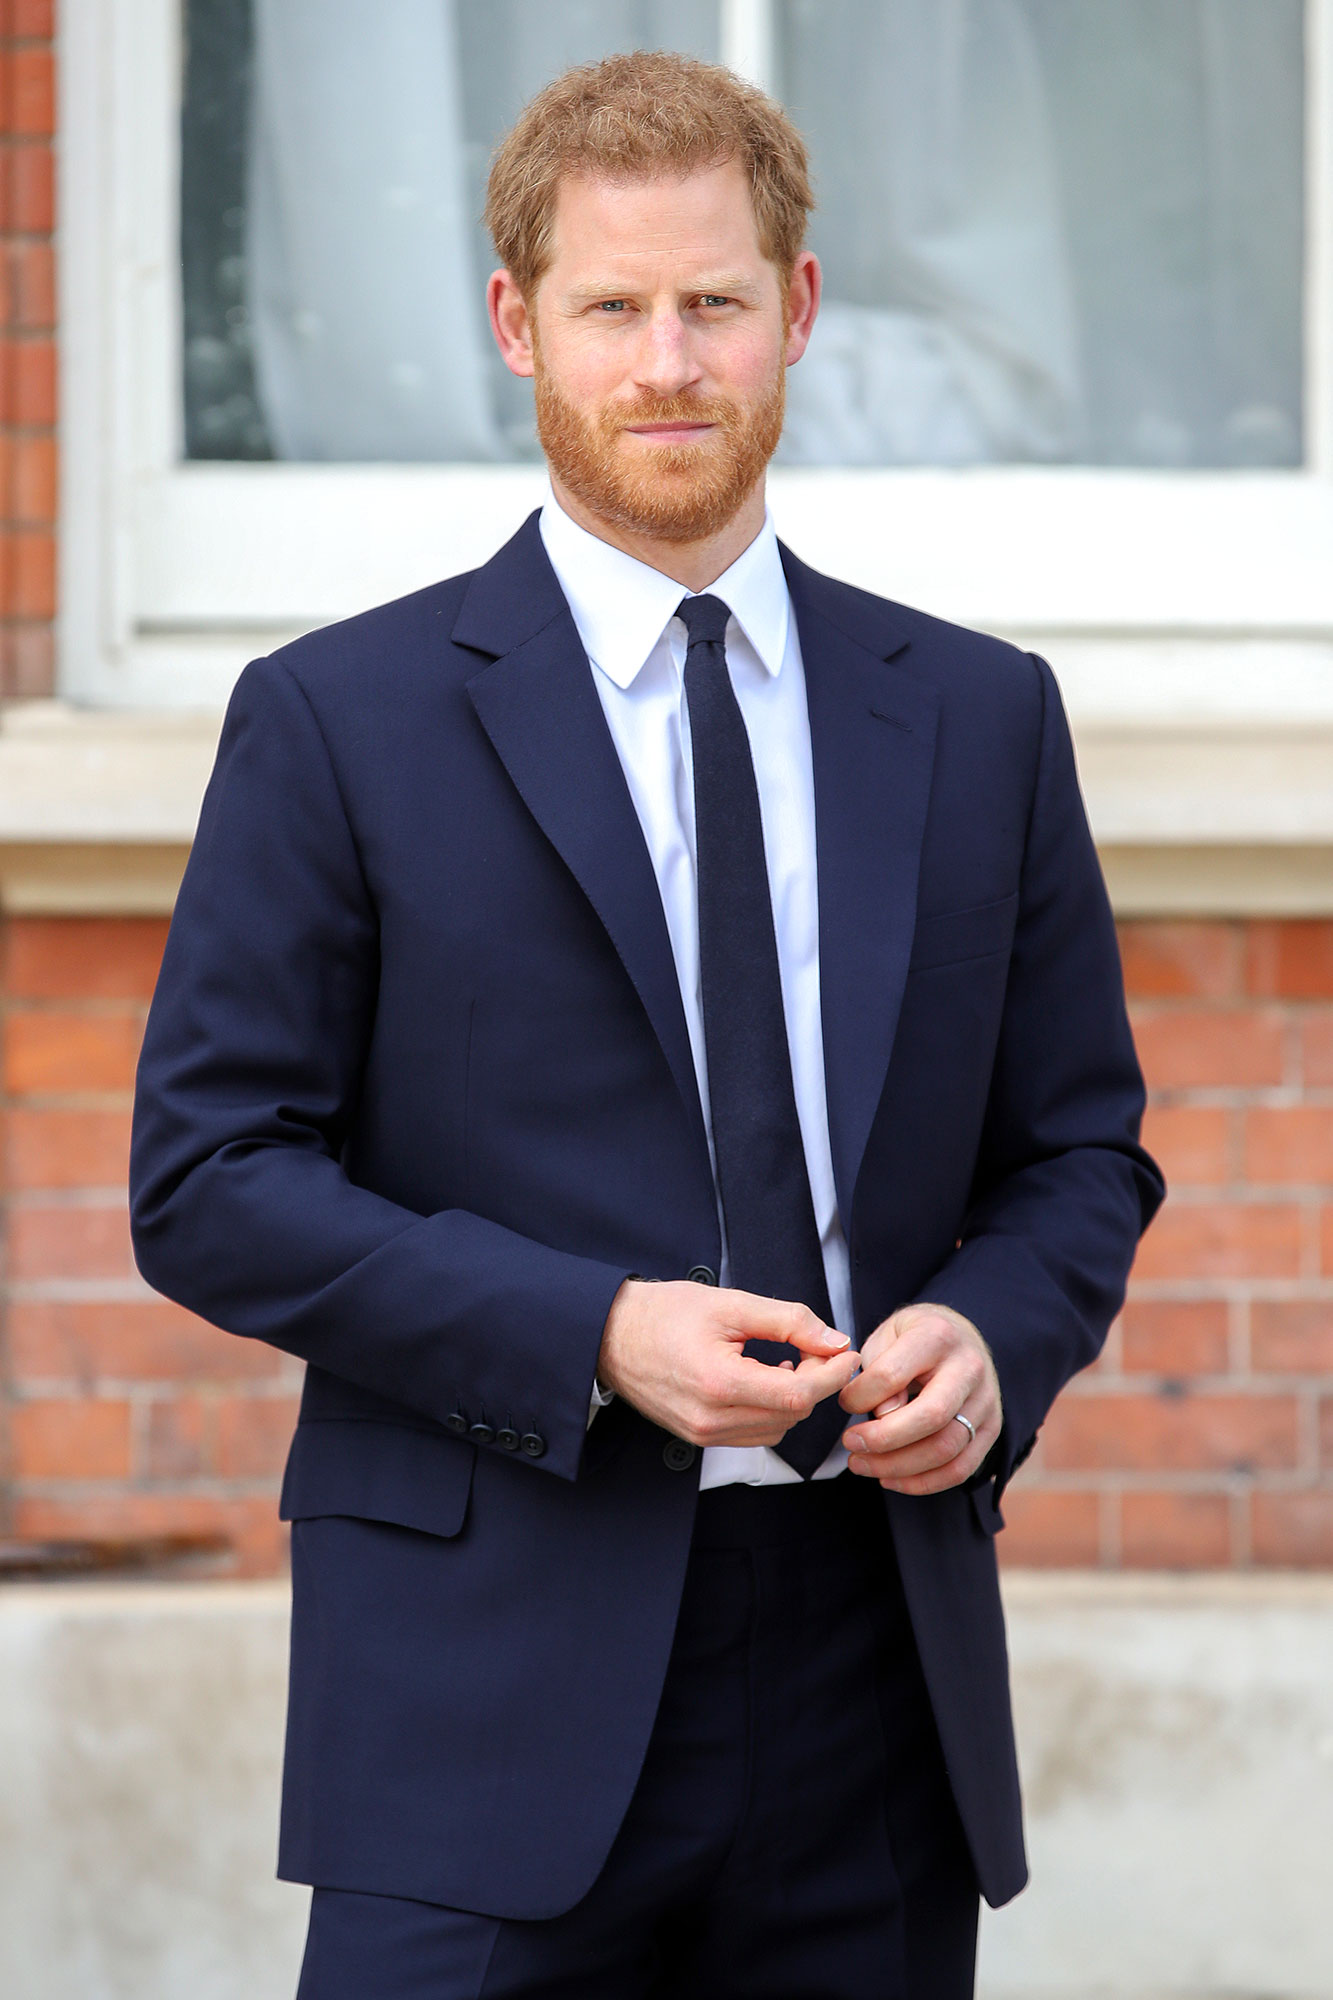 Prince Harry Is Concerned About Social Media